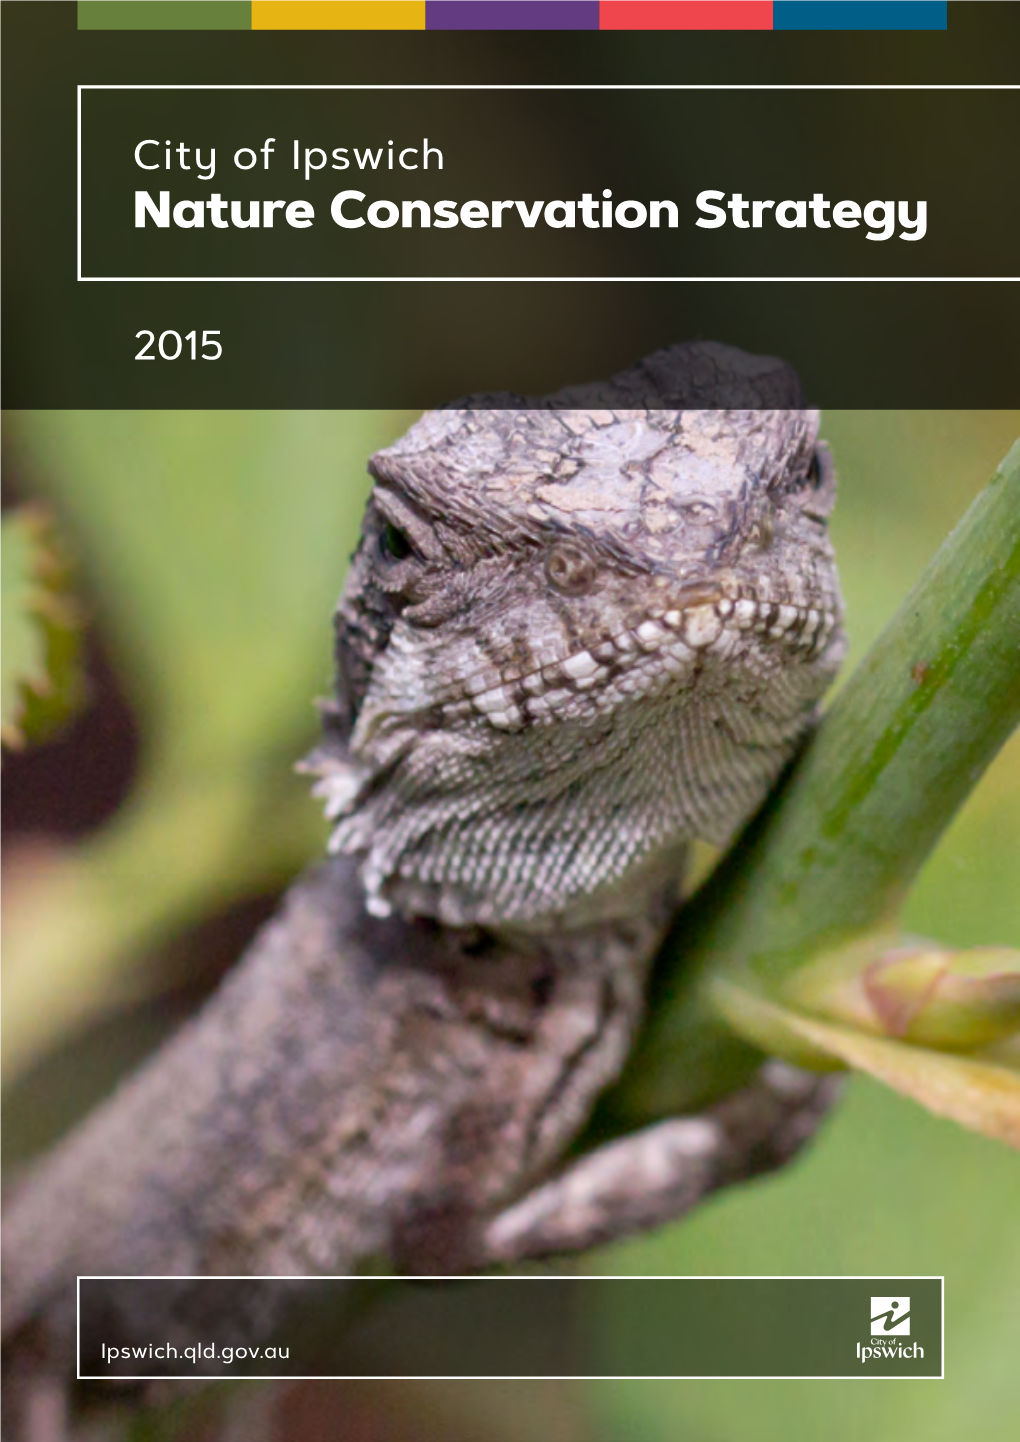 Ipswich Nature Conservation Strategy 2015